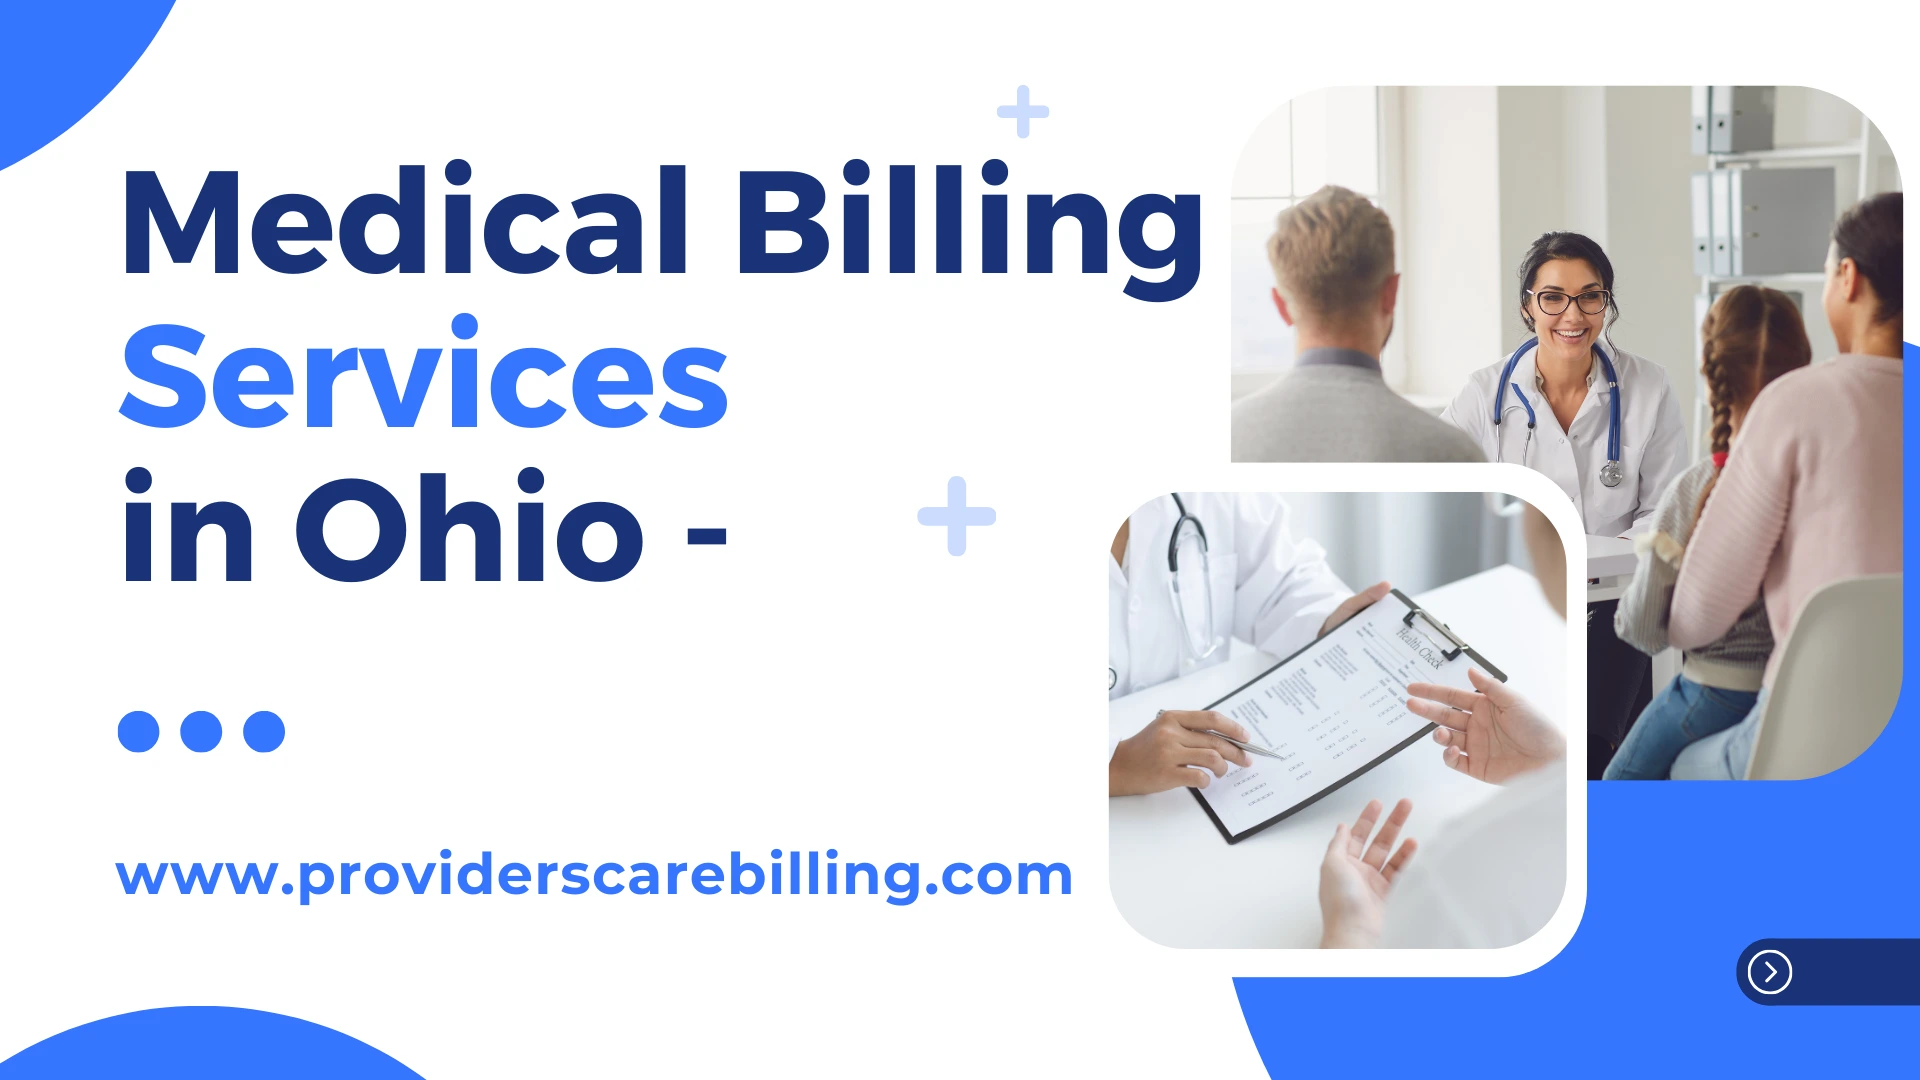 Medical Billing Services in Ohio!